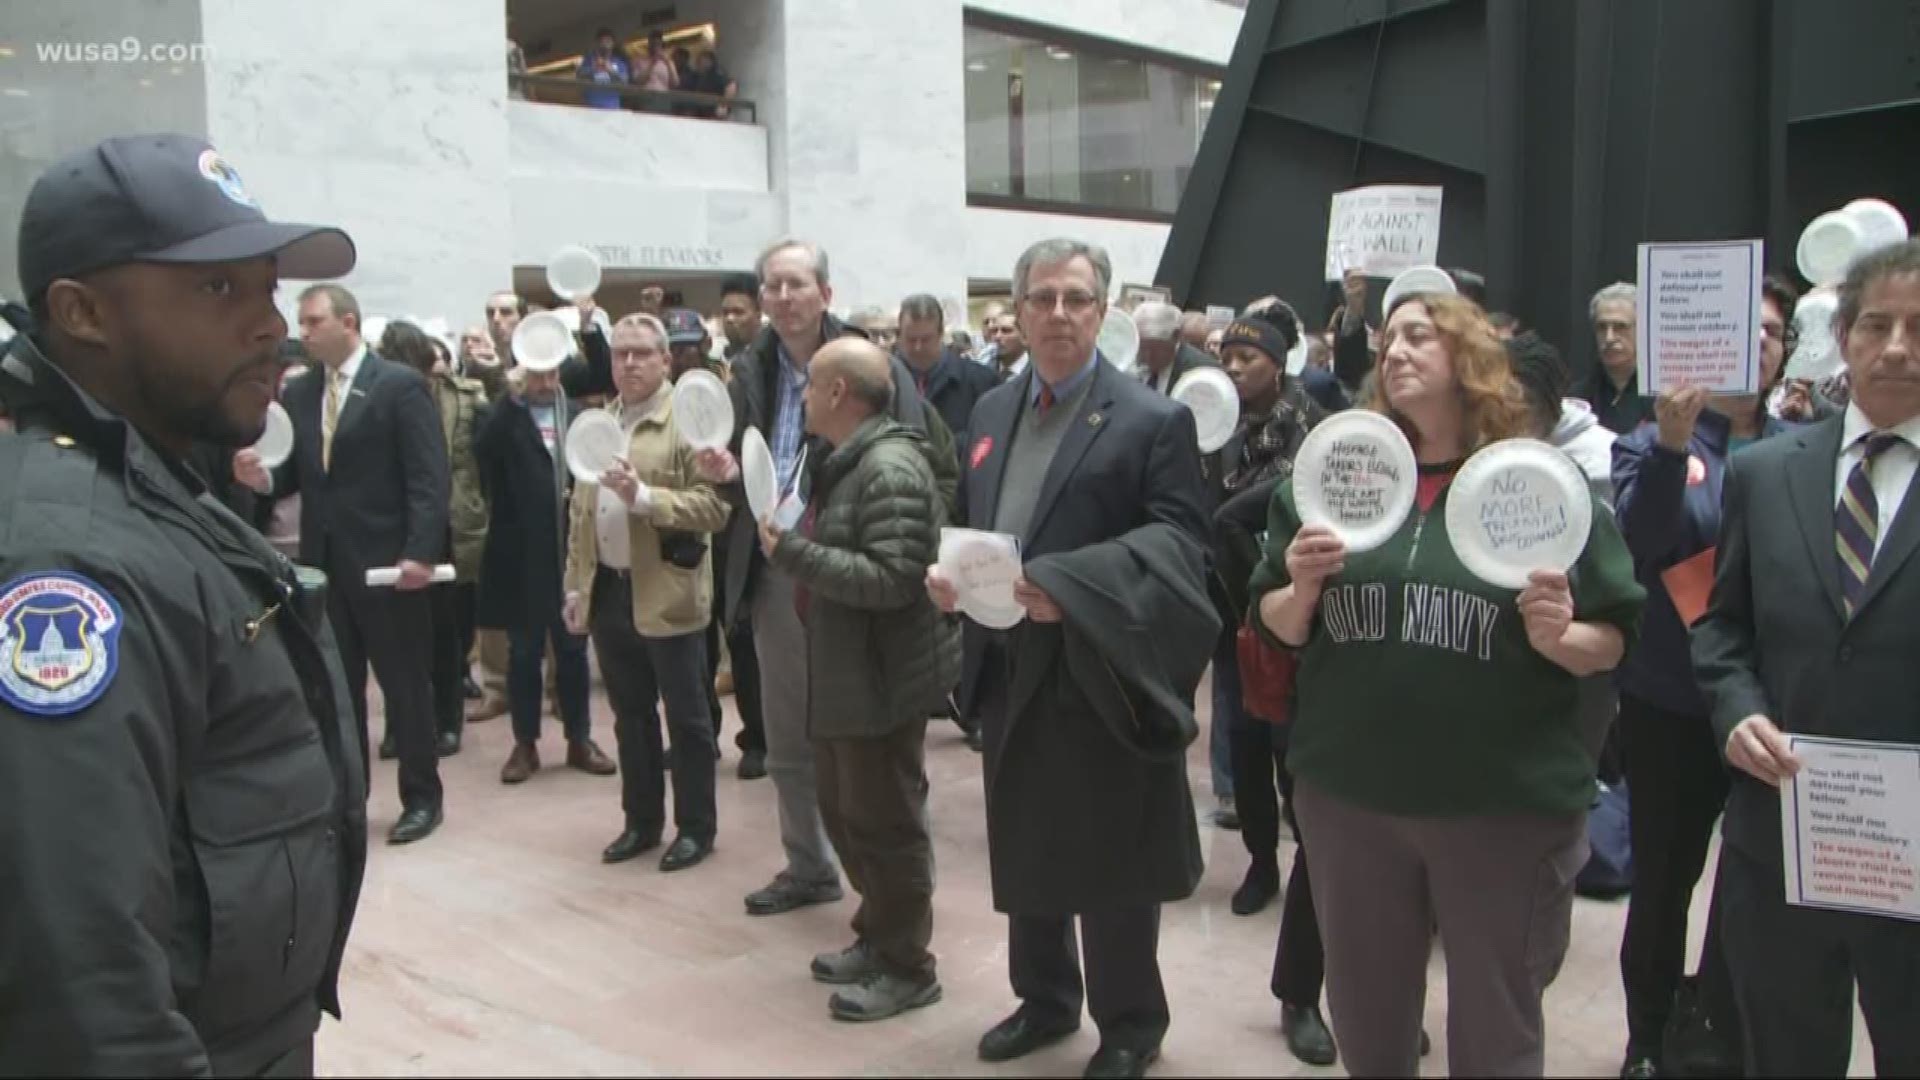 Hundreds of furloughed federal workers and contractors "occupied" the Hart Senate Office Building Wednesday. They stood in silence for 33 minutes -- a minute for each day the government has been shutdown.